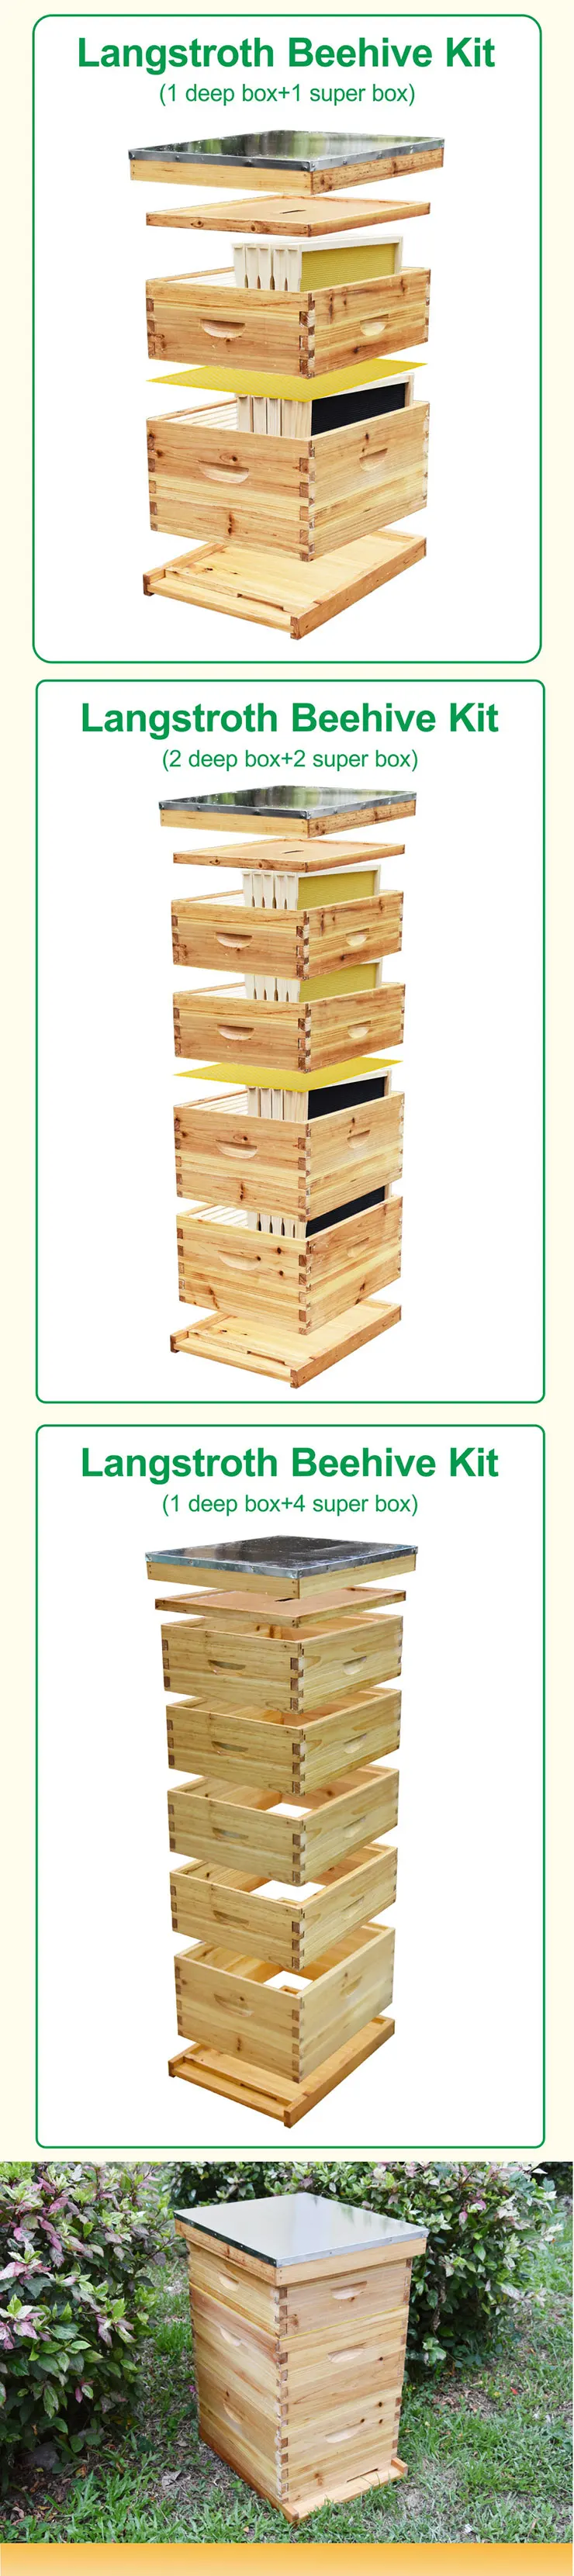 Benefitbee Langstroth Beehive Kit bee hives complete beekeeping bee hive kit with 10 frames